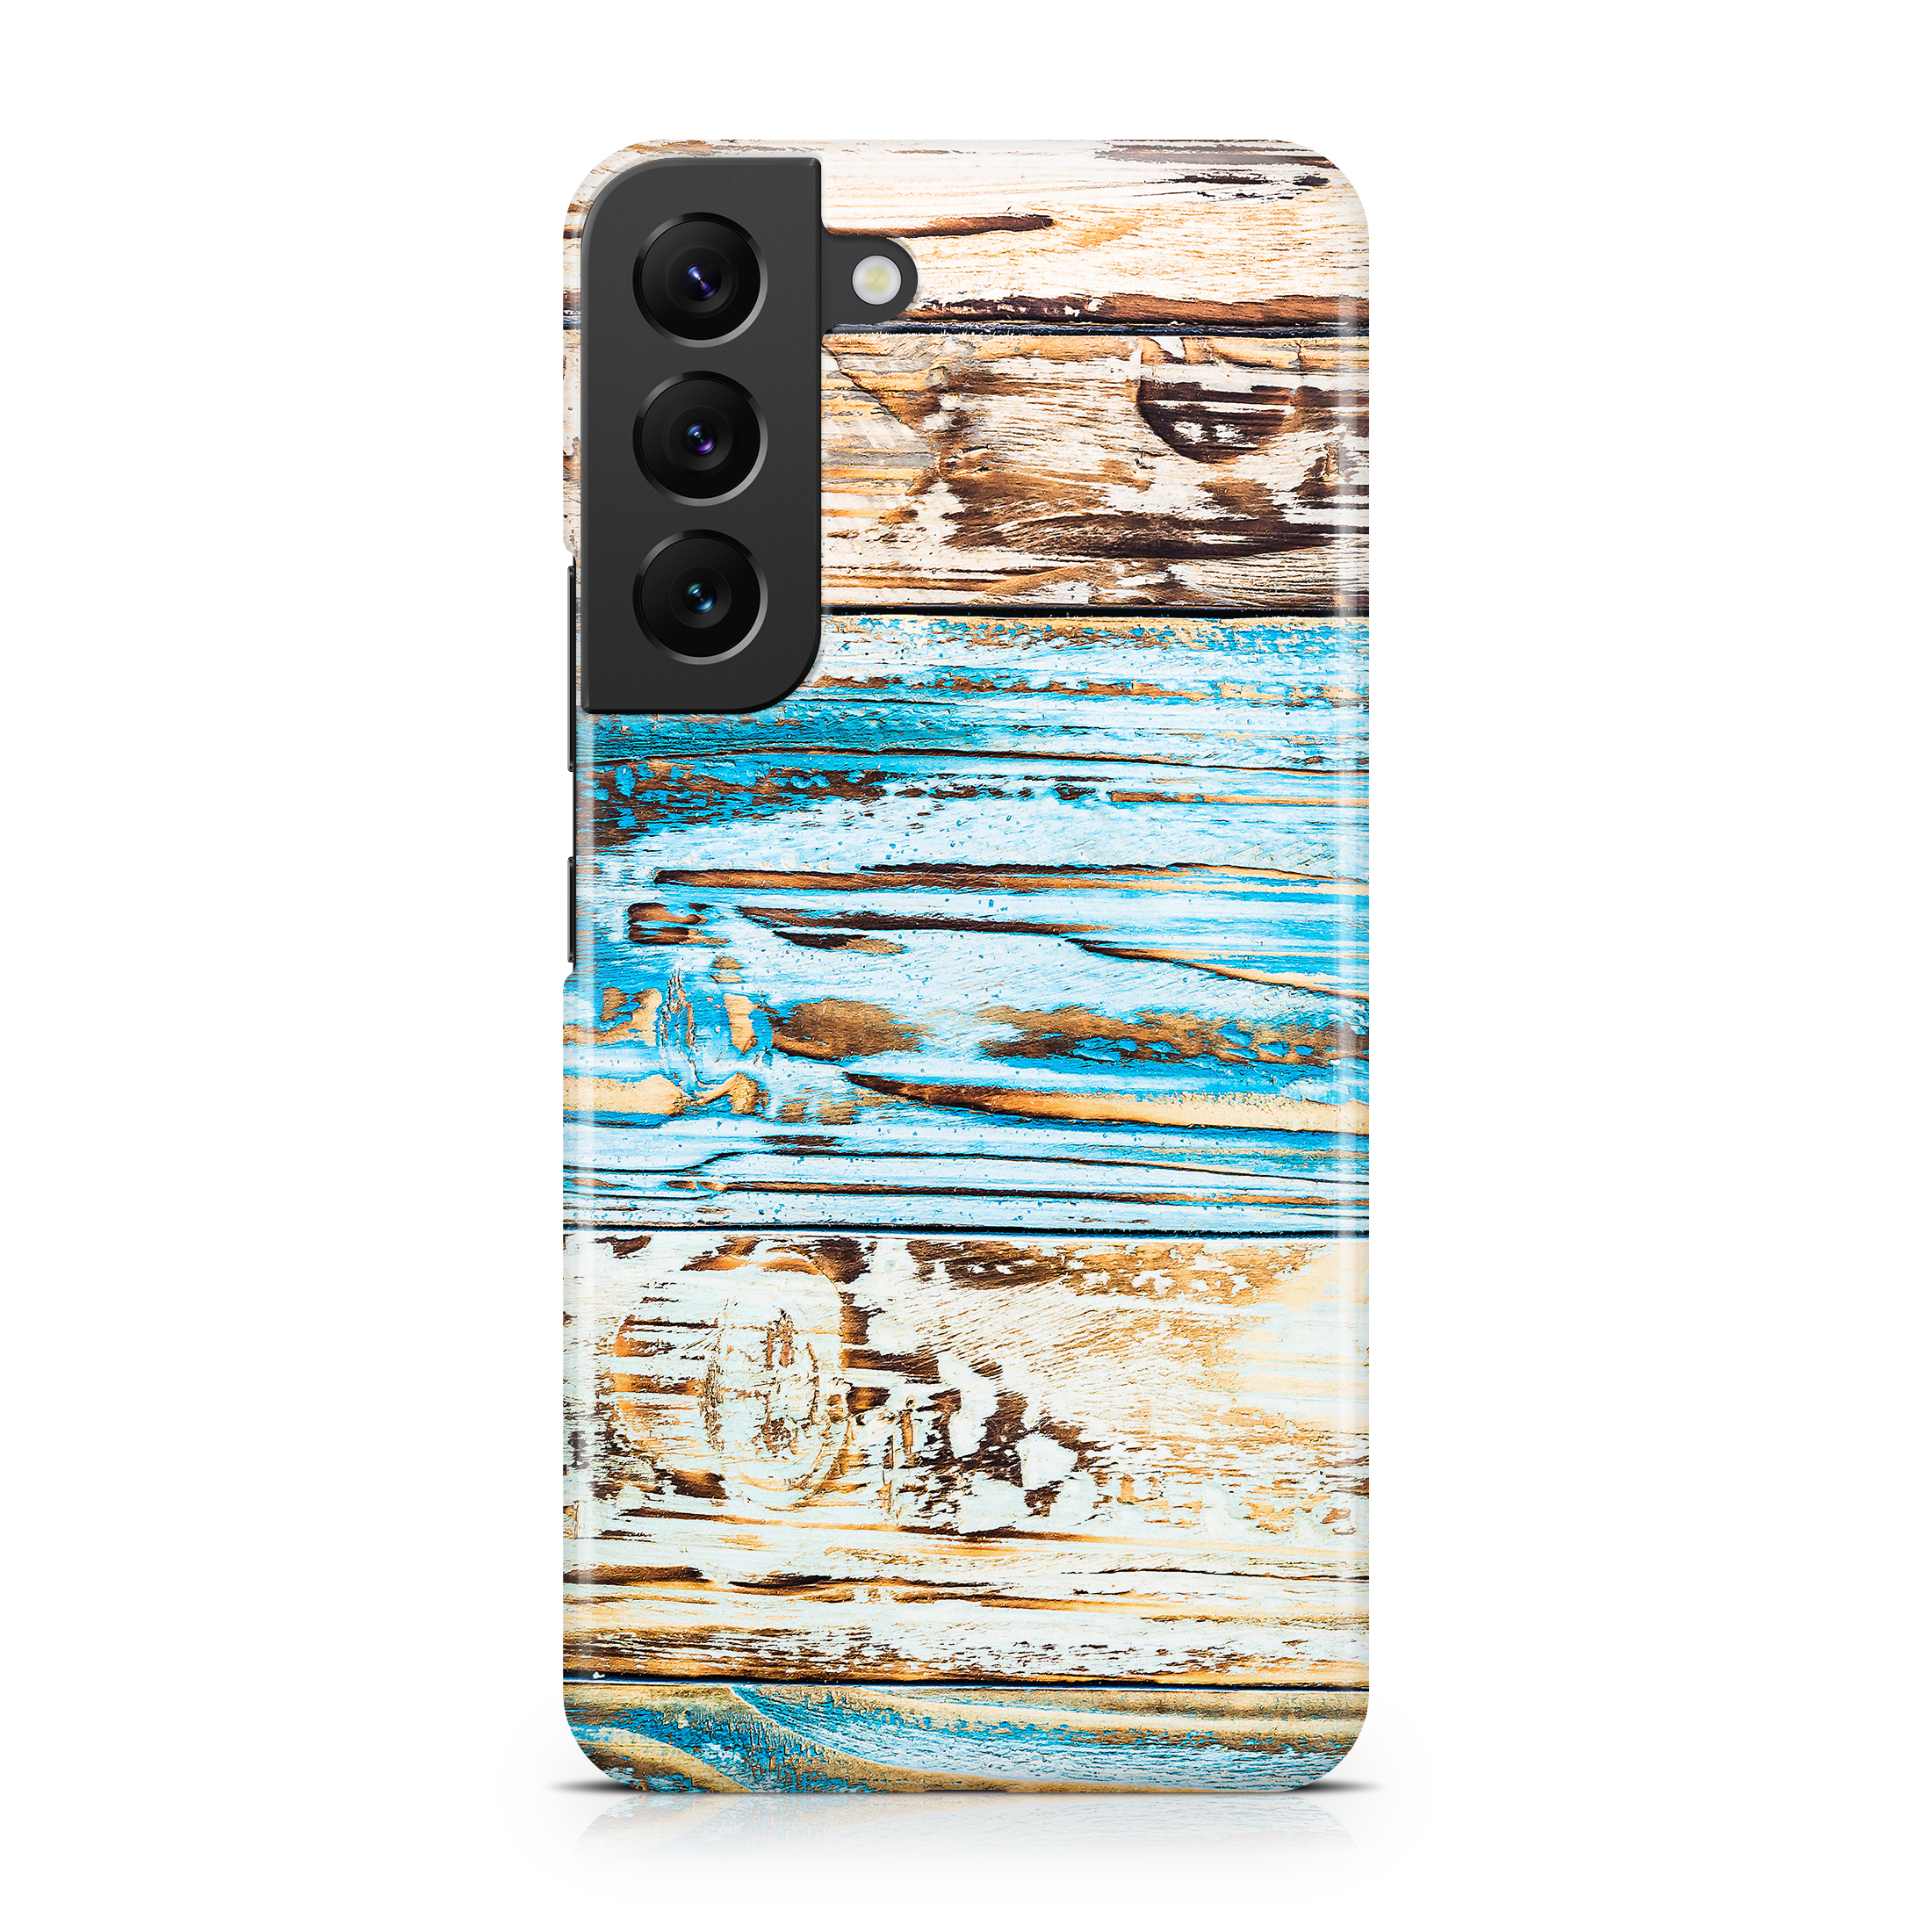 Scrapped Bluewash - Samsung phone case designs by CaseSwagger